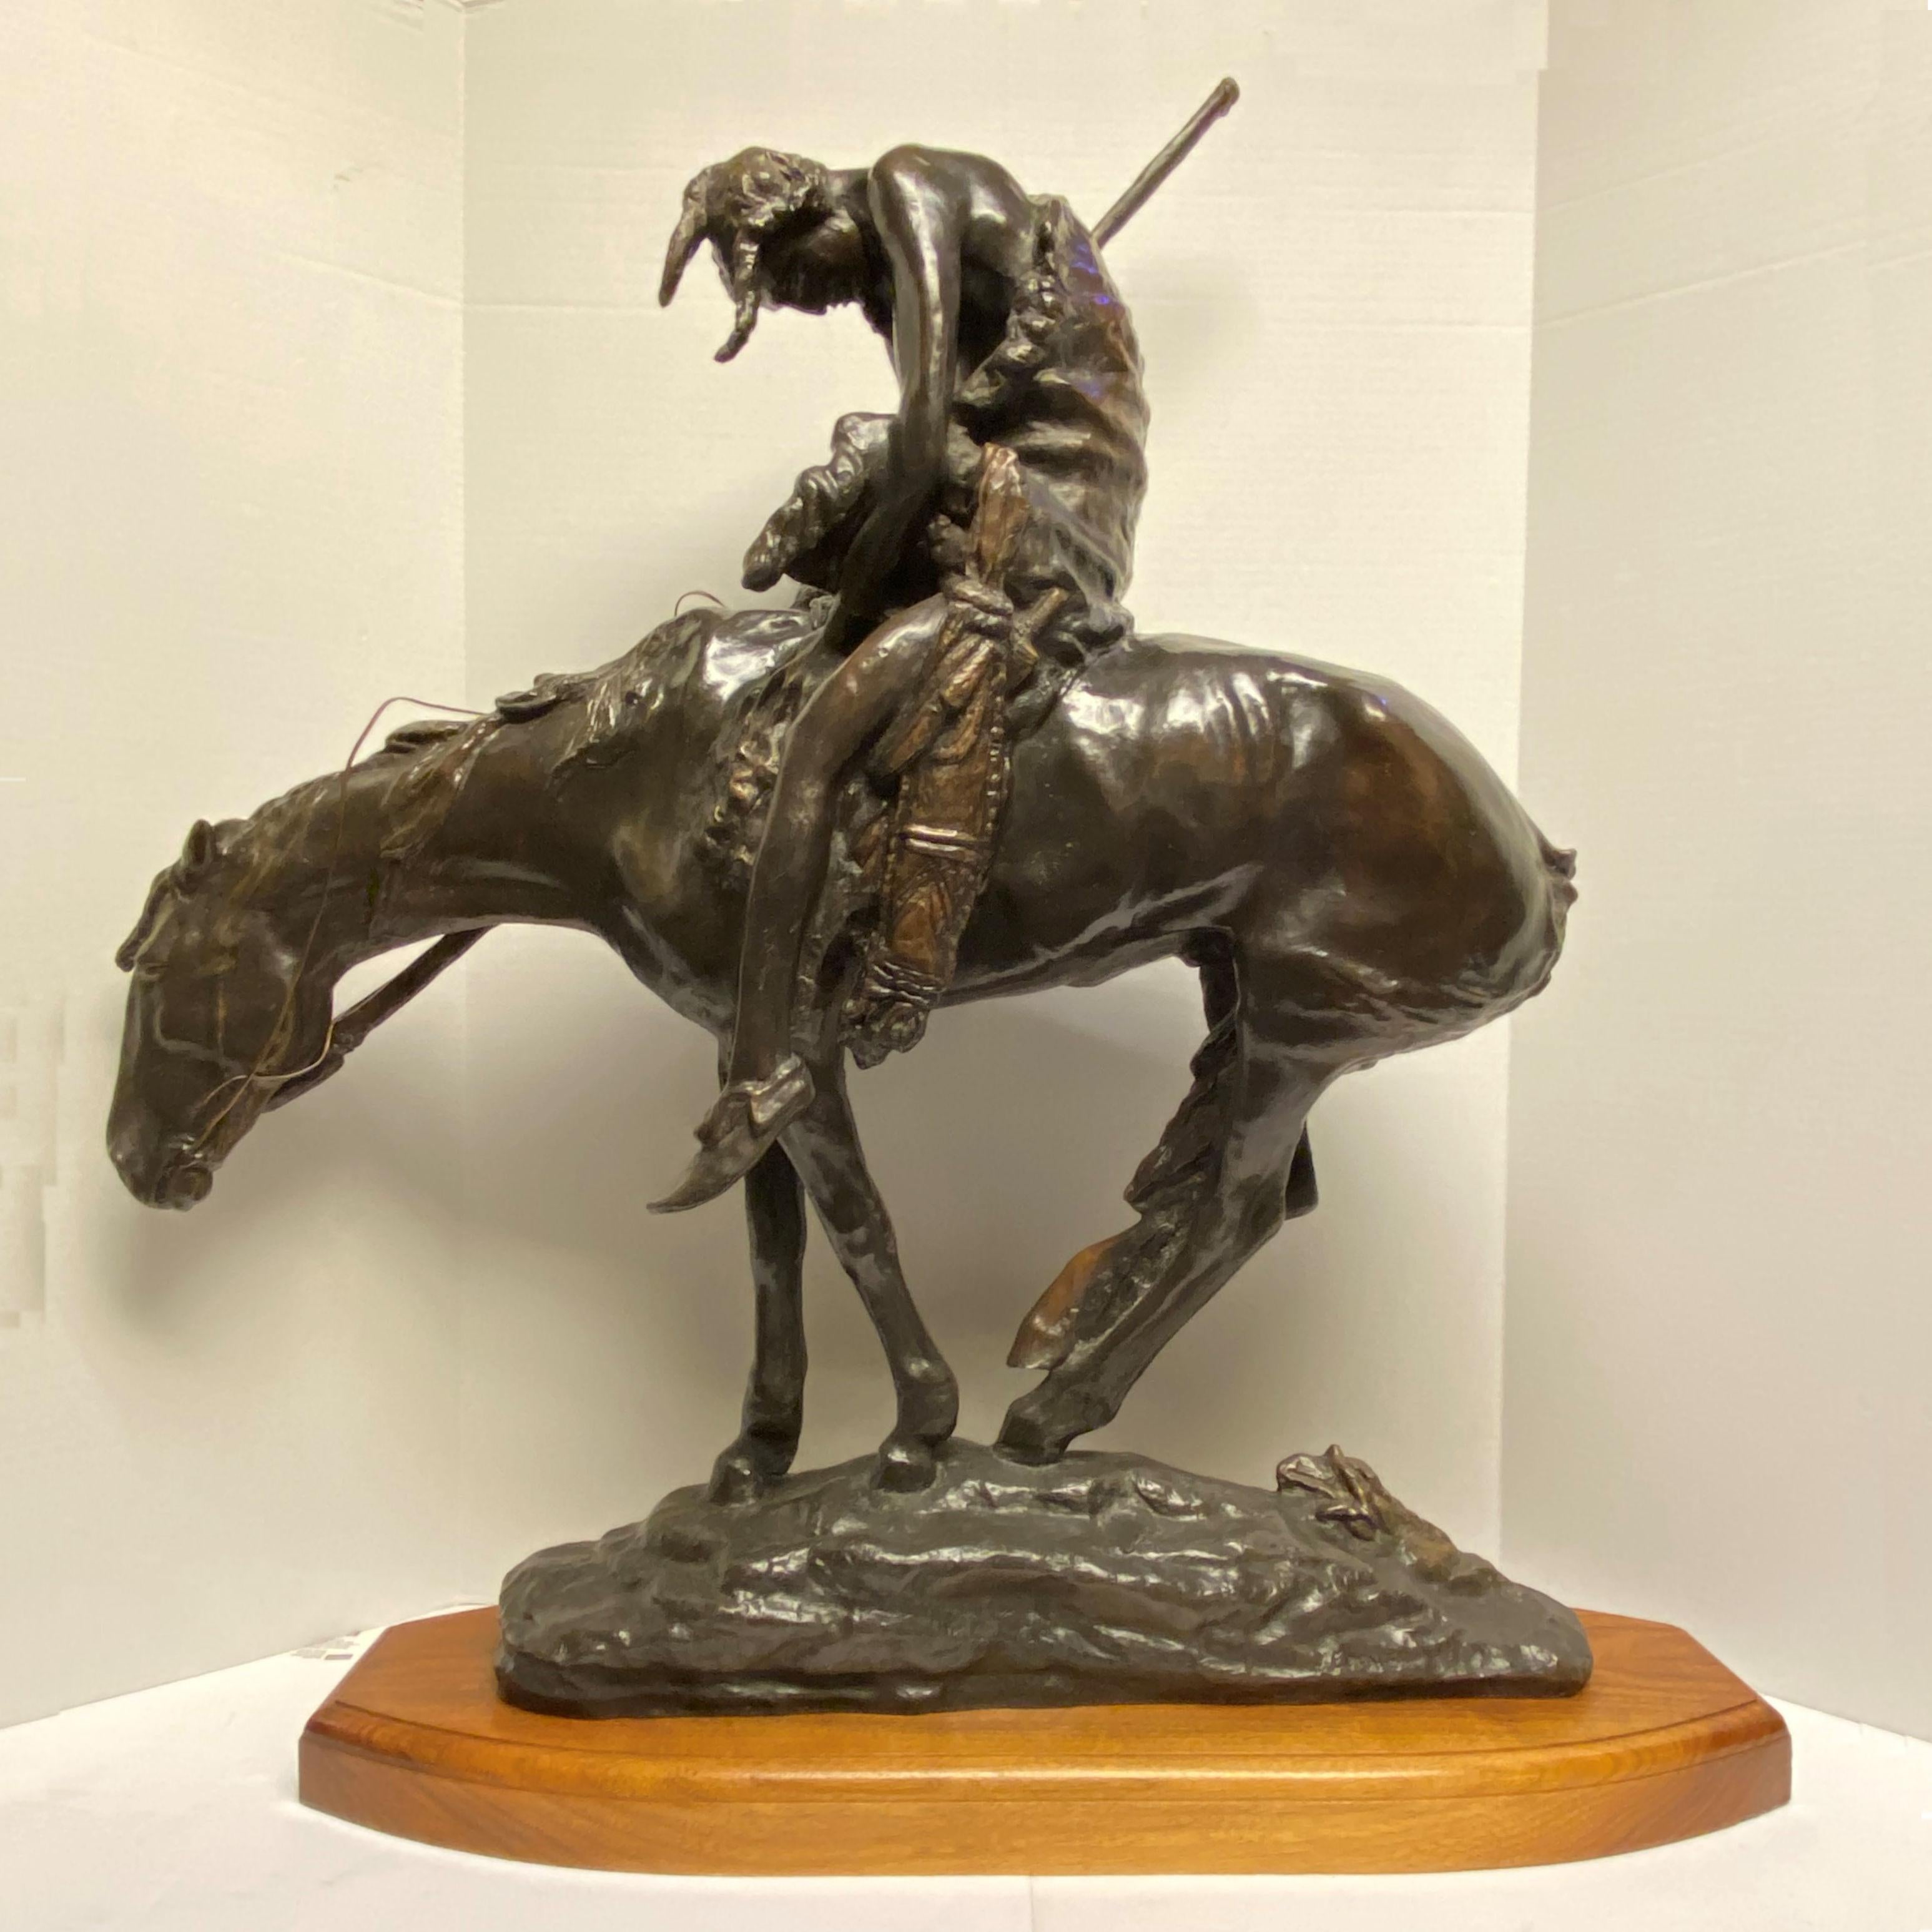 Bronze After James Earl Fraser (1876-1953) Entitled End of the Trail, mounted on craved, stained wooden base.